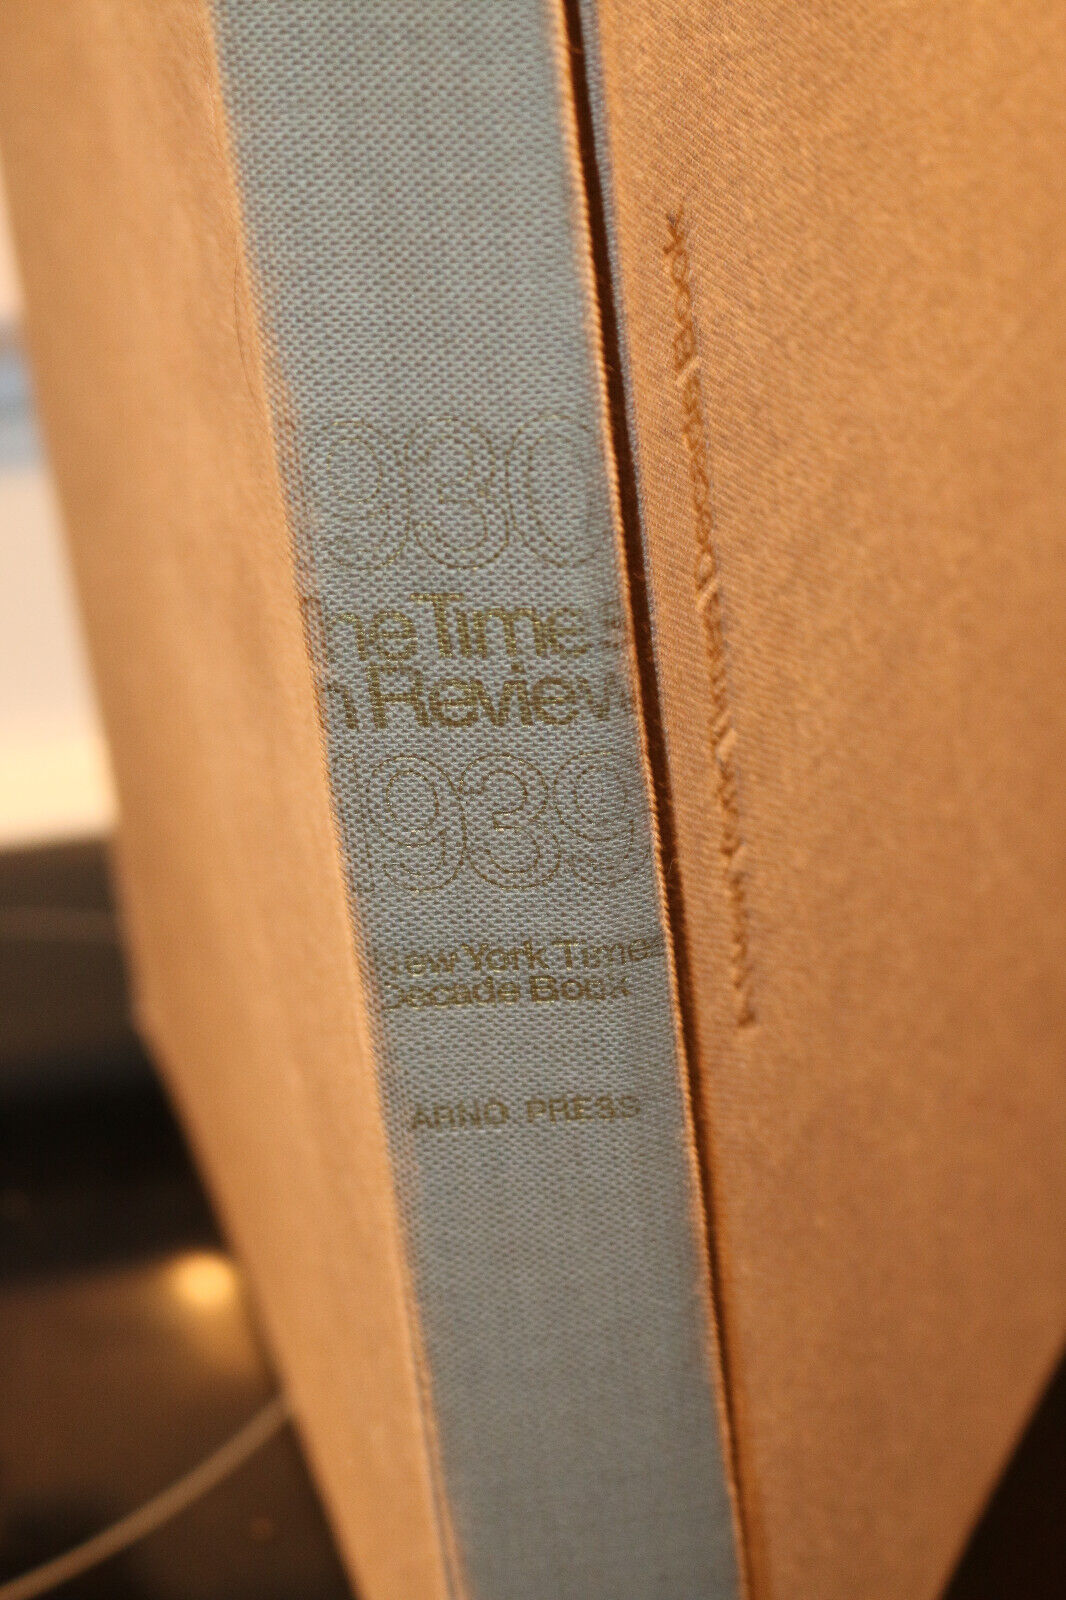 The New York Times Decade Heavylarge Book Times In Review 1930-1939 Vintage Rare